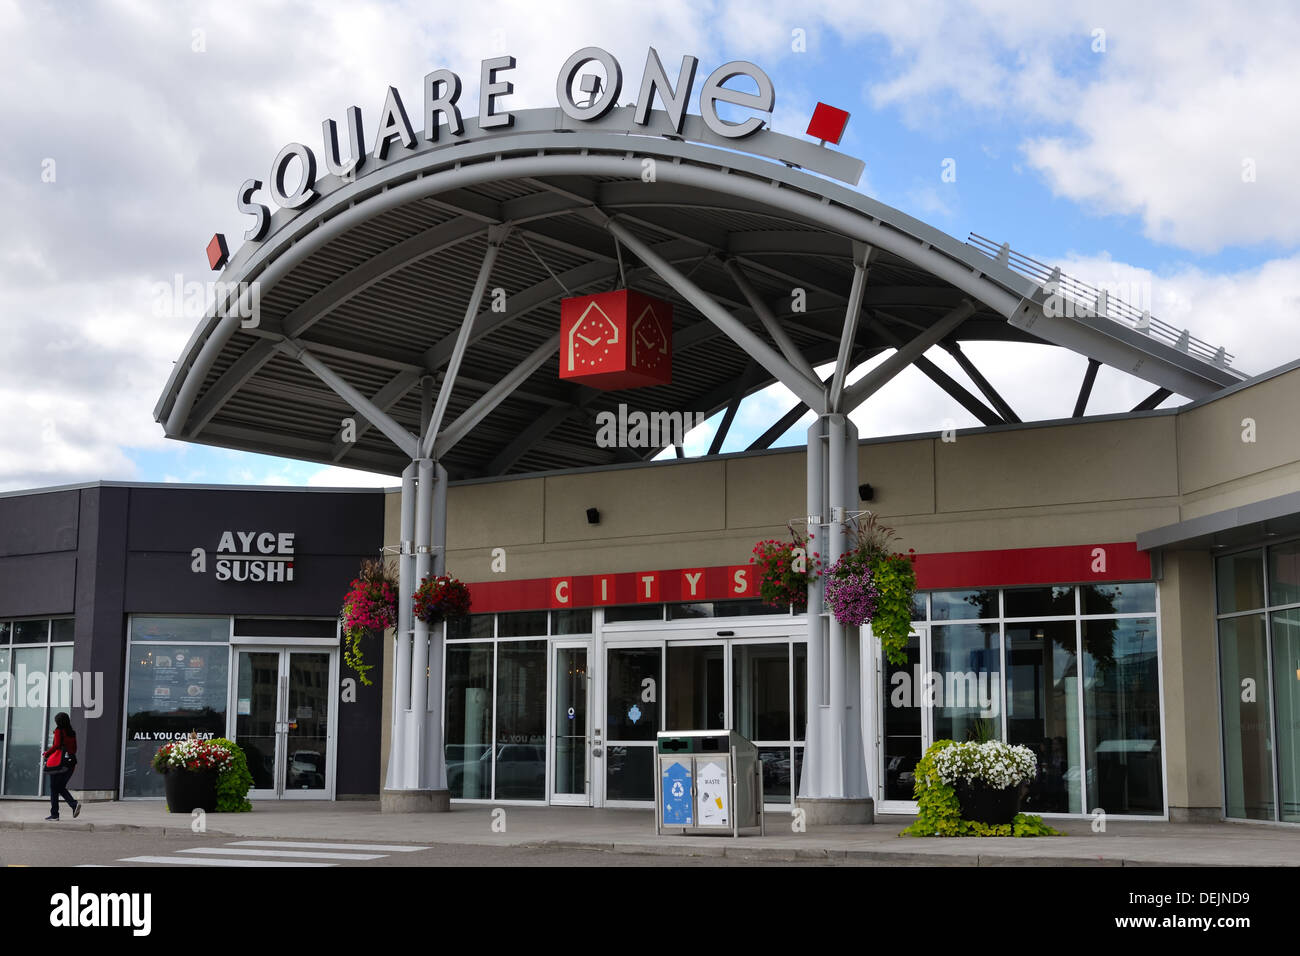 https://c8.alamy.com/comp/DEJND9/square-one-shopping-mall-at-city-centre-drive-mississauga-ontario-DEJND9.jpg